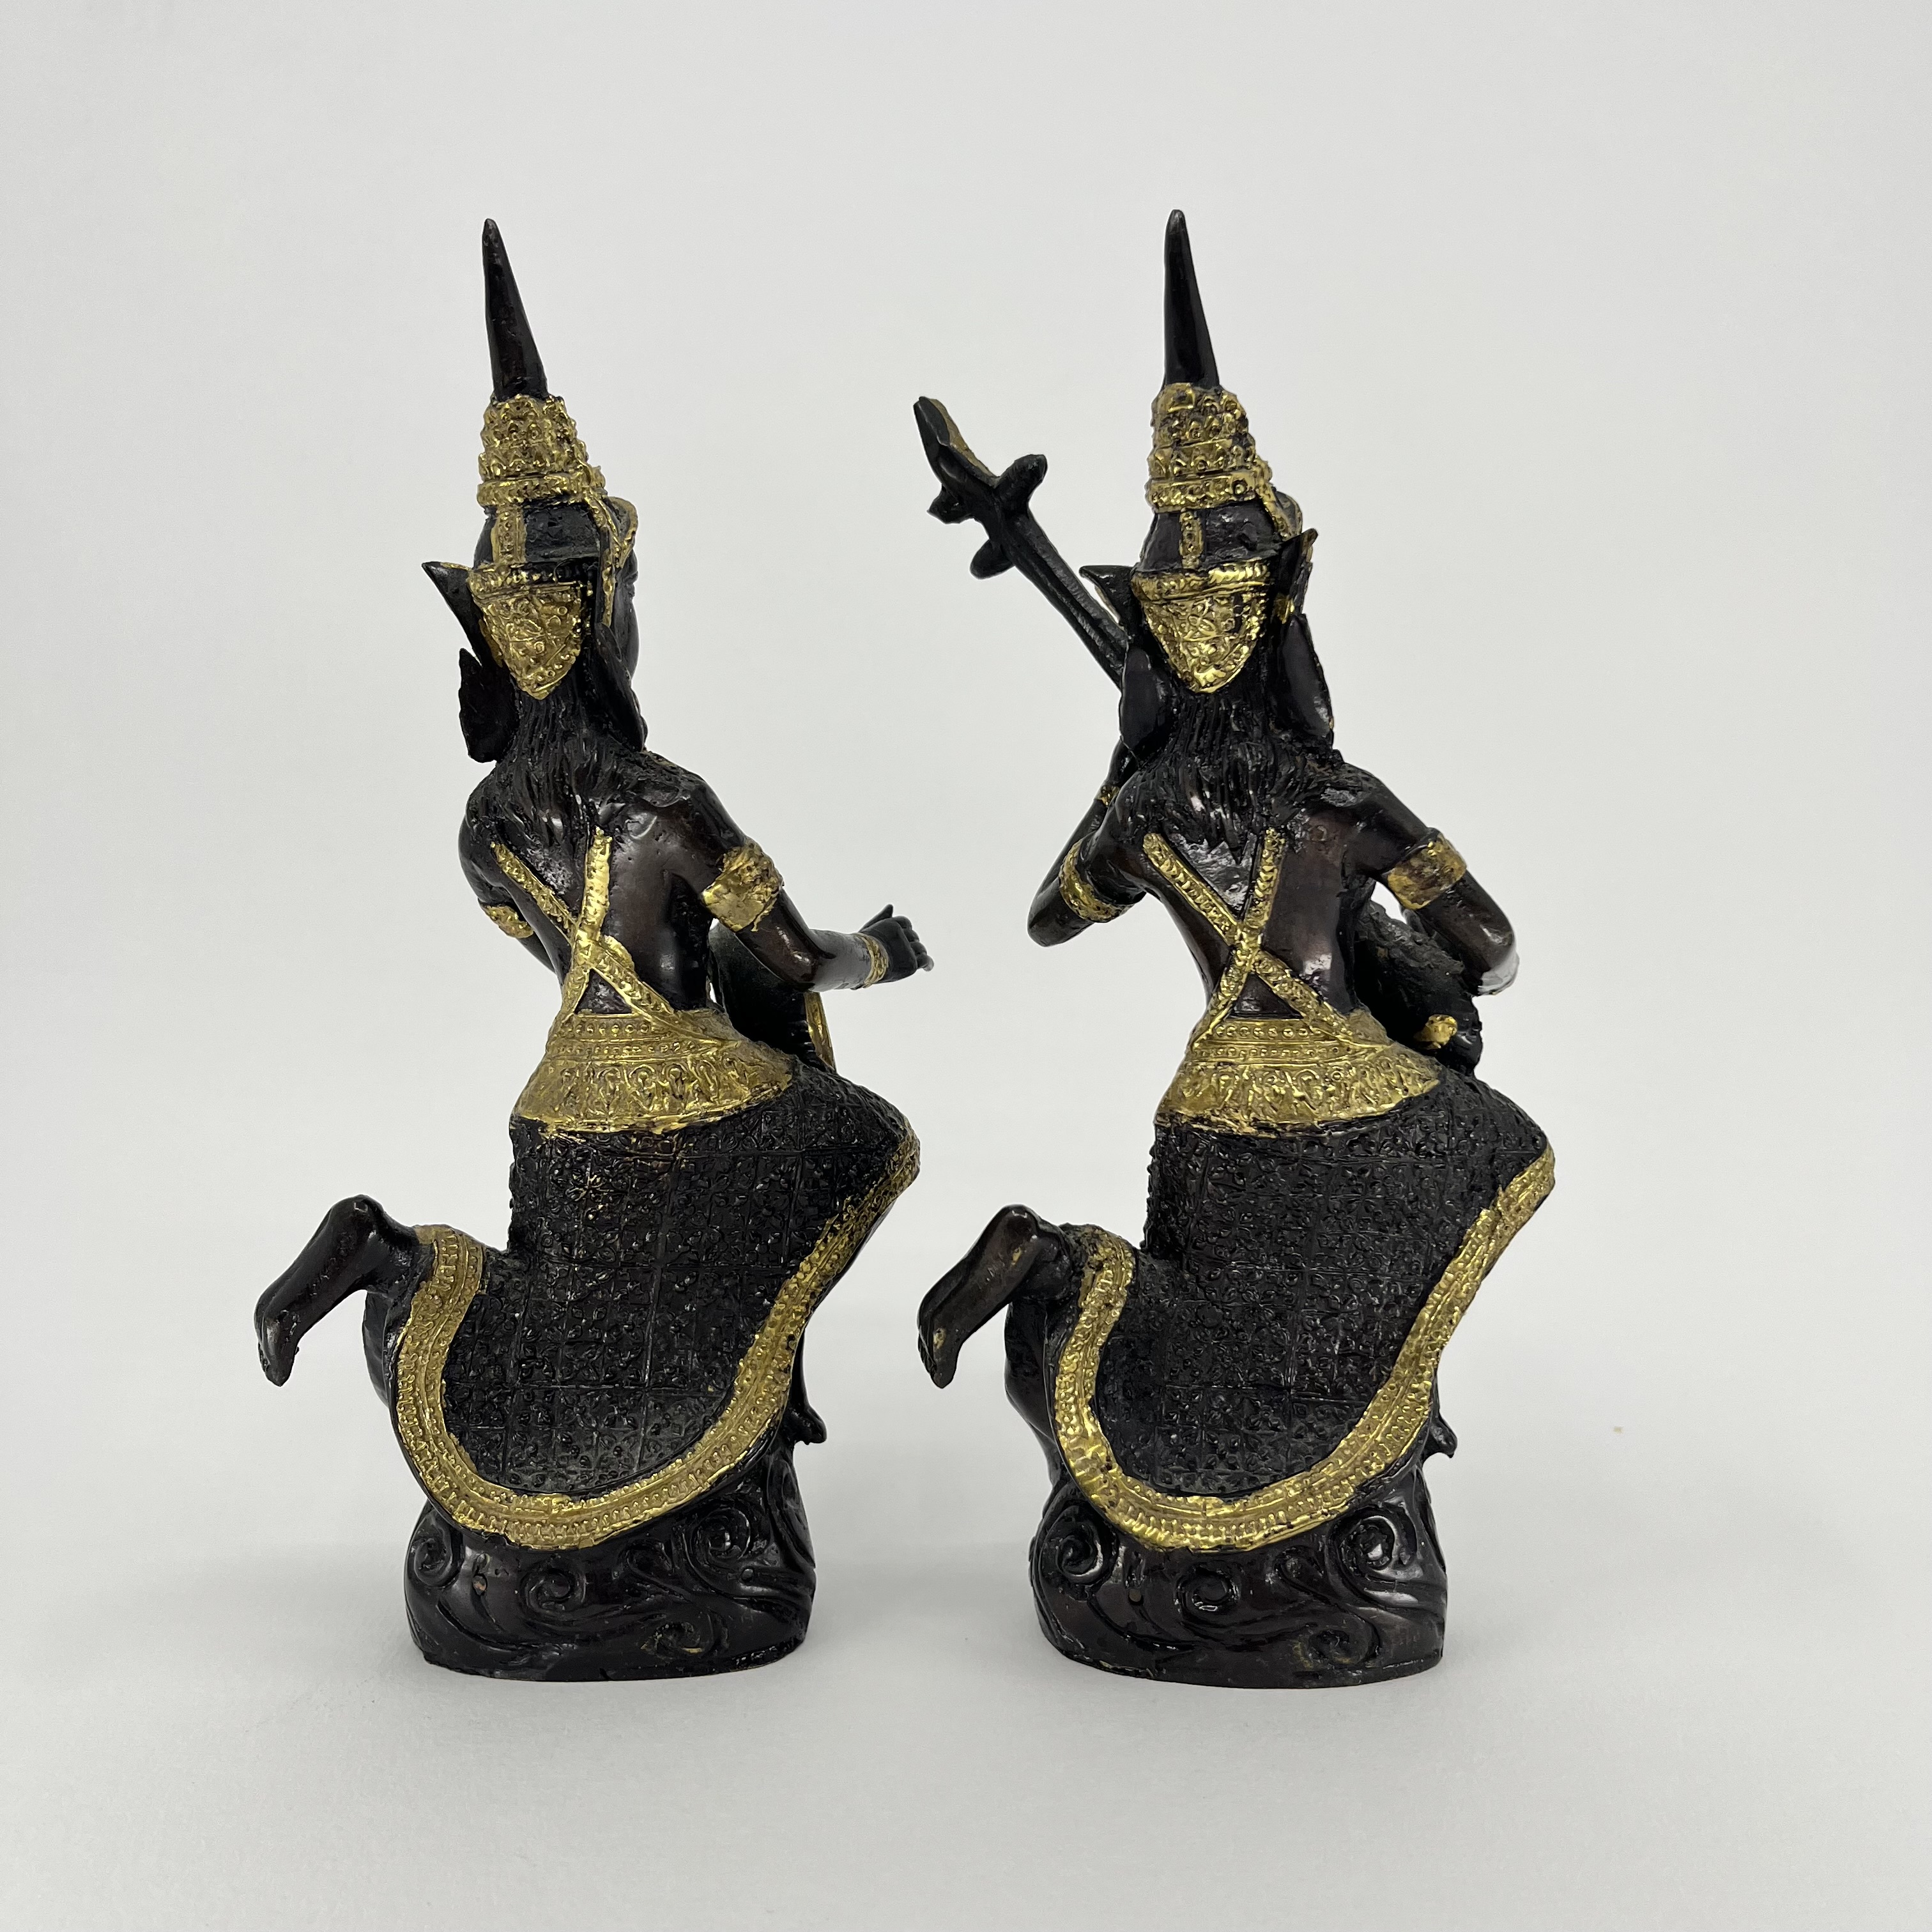 A Pair of Gilded Bronze Thai Theppanom Angel Temple Musician Figurines - Image 3 of 7